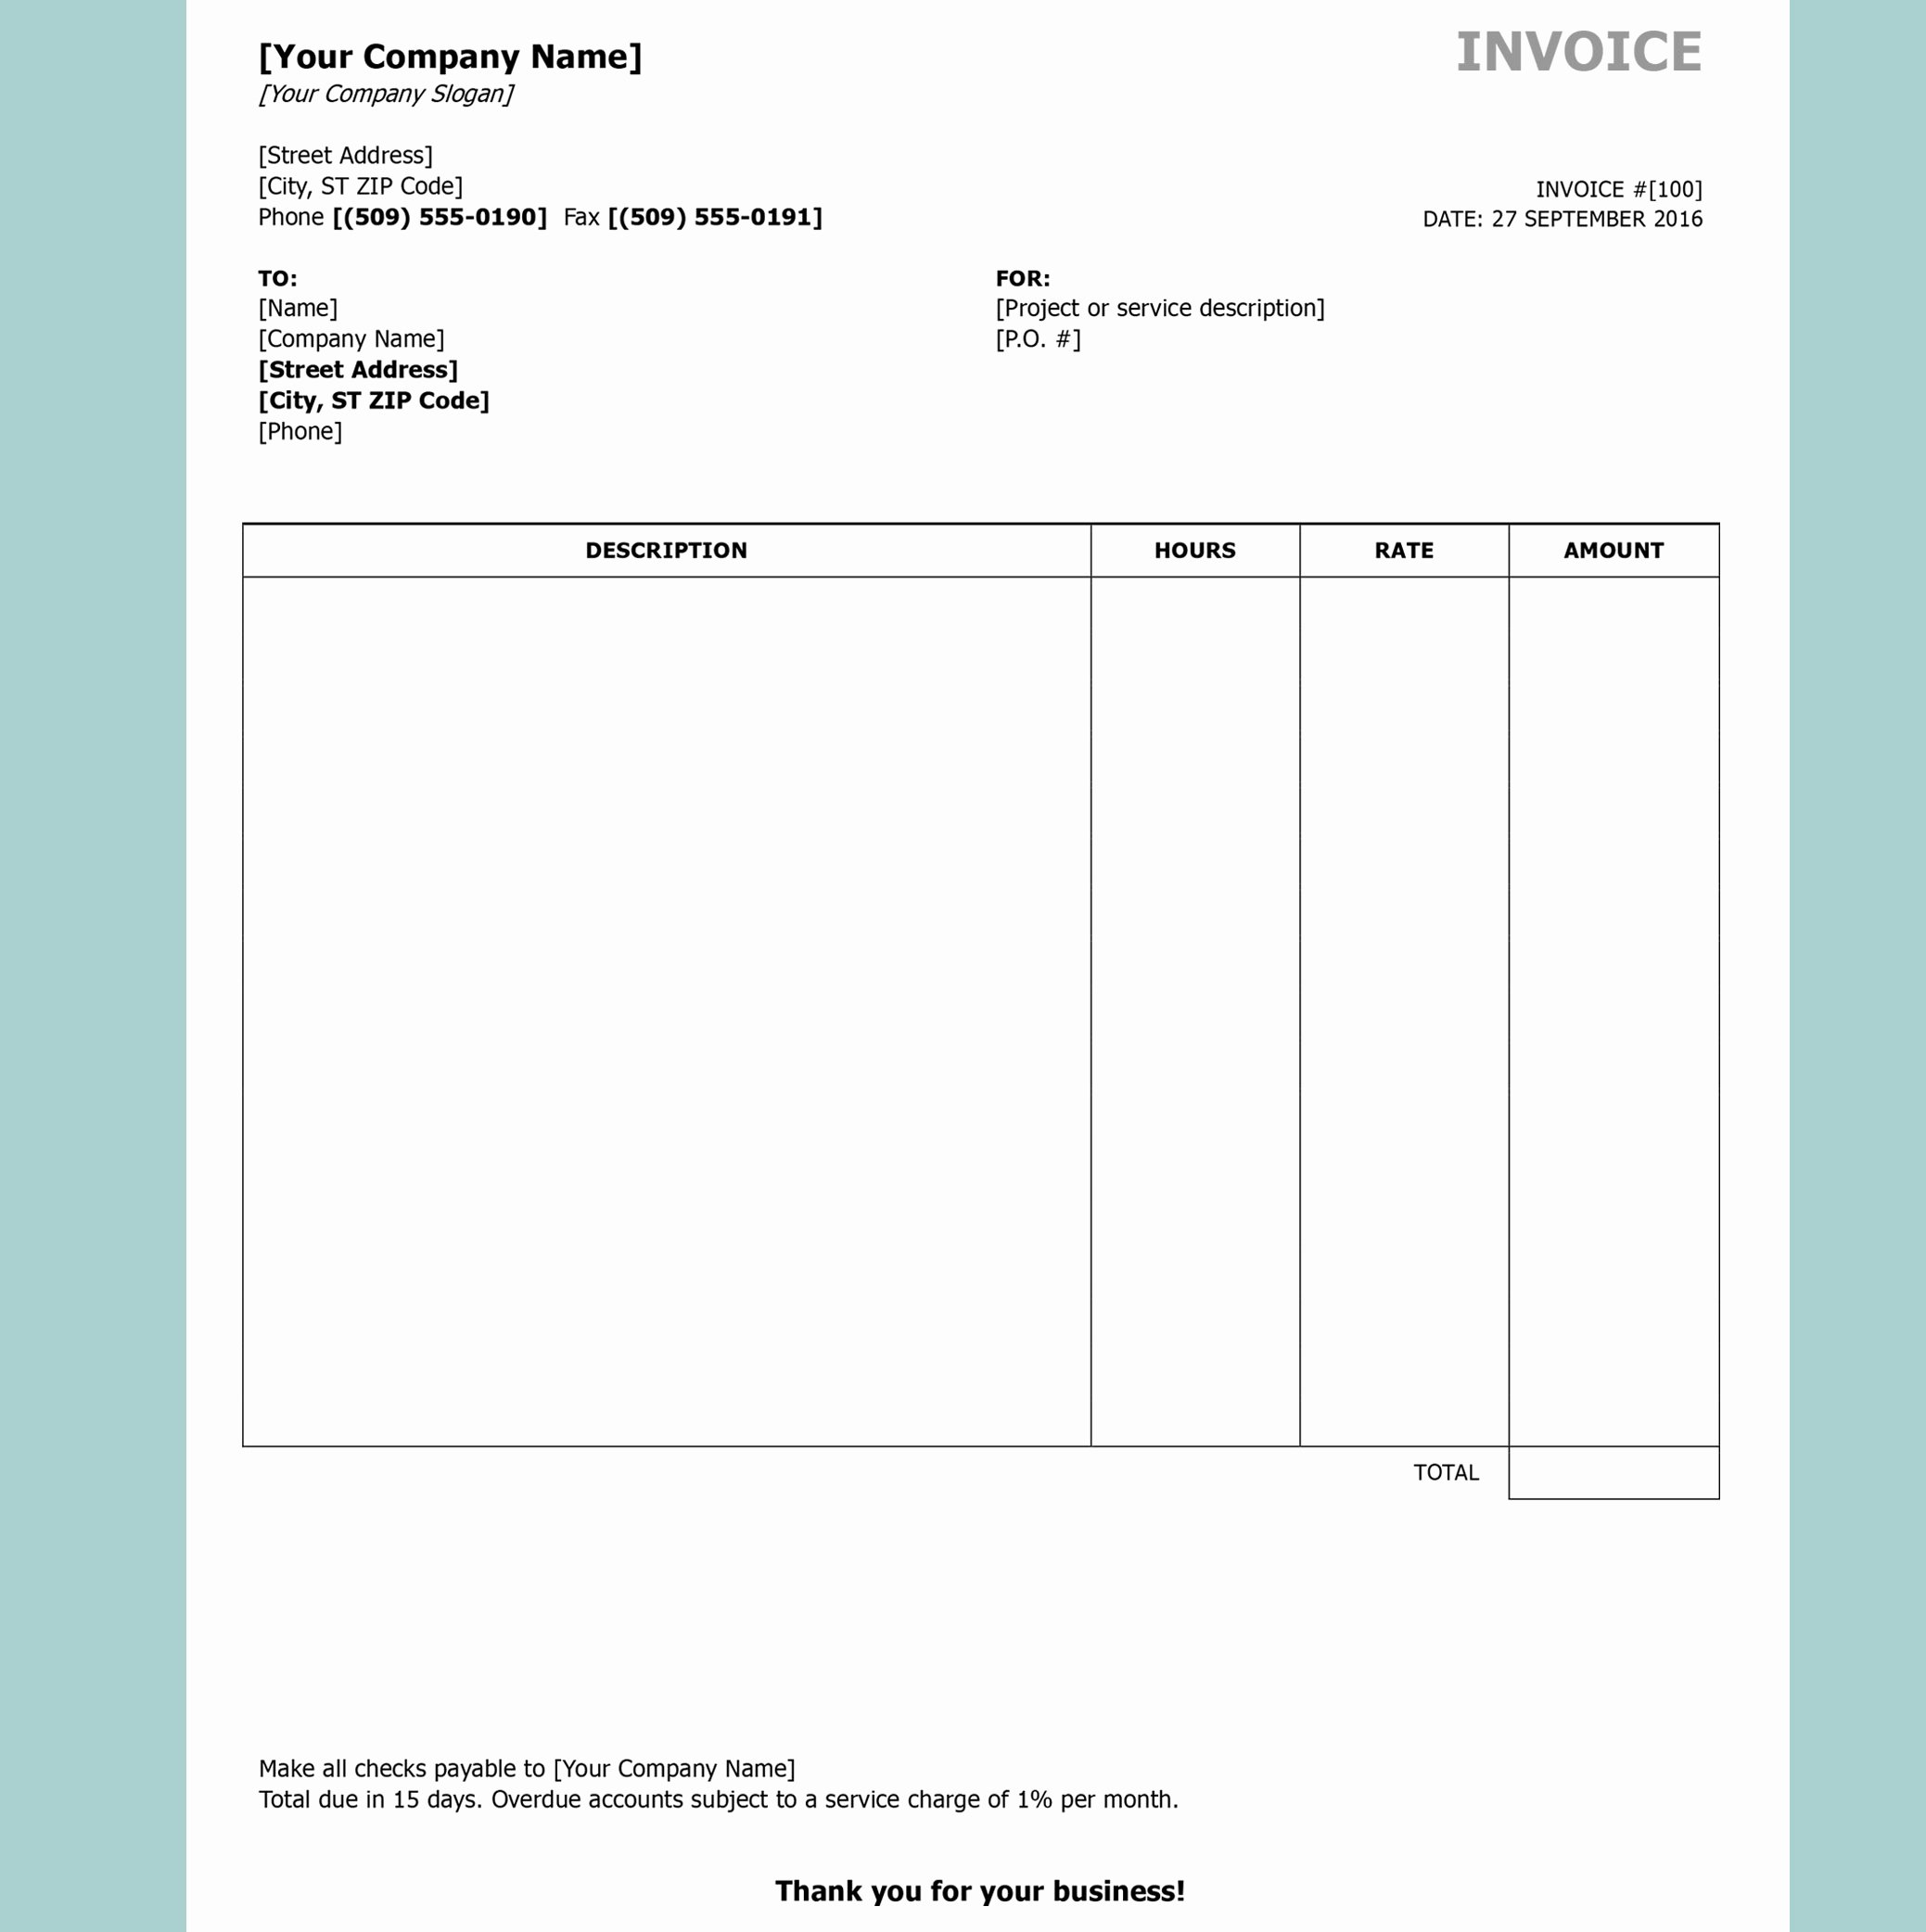 Free Invoice Templates by Invoiceberry the Grid System